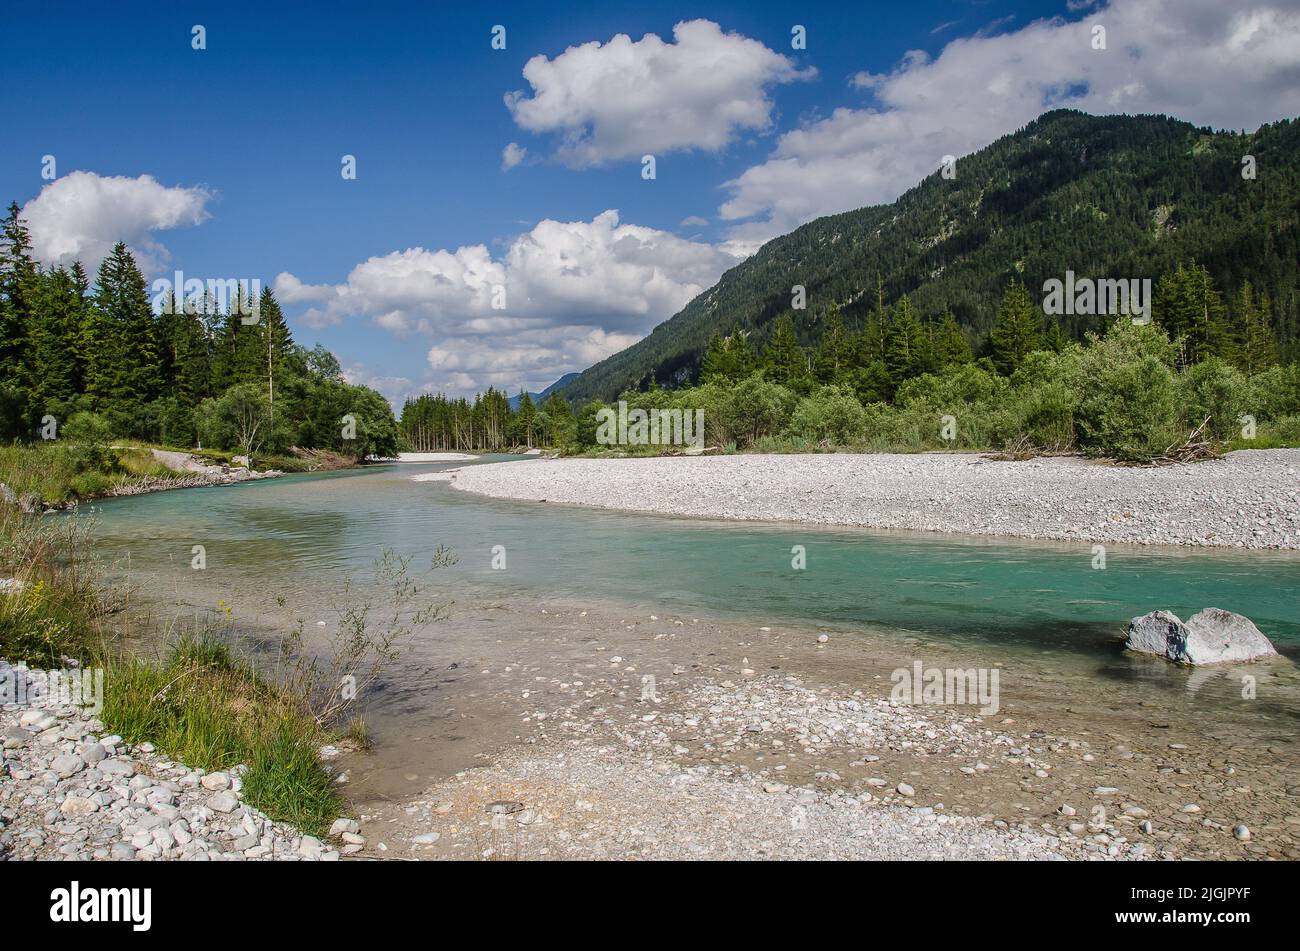 View of the  Isar River before it flows into Sylvenstein Lake in the Bavarian Alps Stock Photo